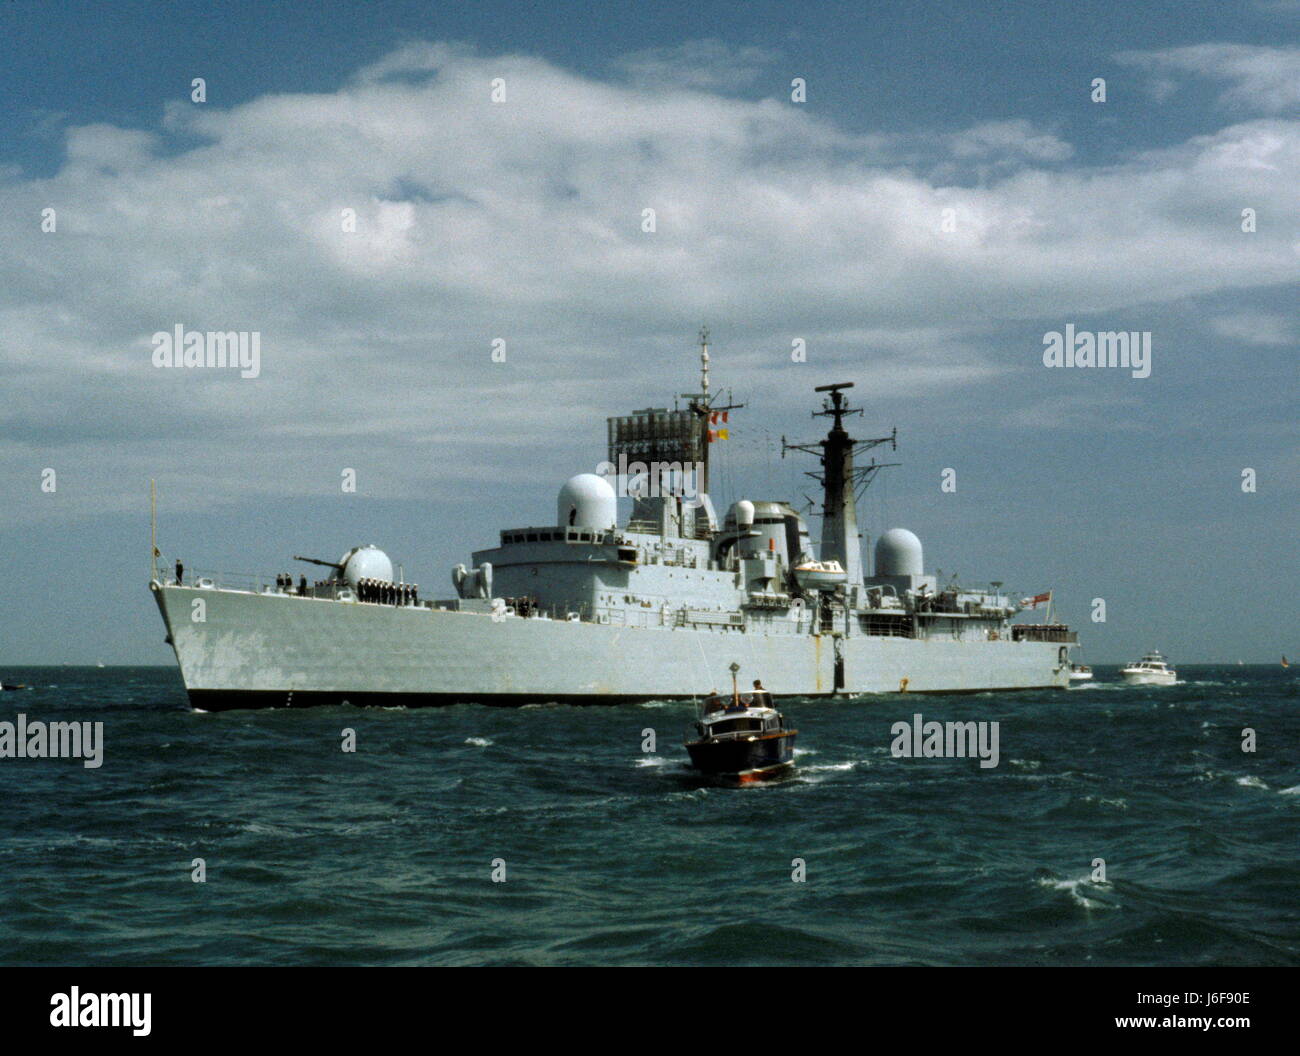 AJAXNETPHOTO. 19TH JUNE. 1982. PORTSMOUTH, ENGLAND. - SURVIVOR RETURNS - THE TYPE 42 (1&2) SHEFFIELD CLASS DESTROYER (3660 TONS) HMS GLASGOW, A PATCH IN HER HULL VISIBLE WHERE AN ARGENTINE BOMB ENTERED THE HULL, RETURNS TO PORTSMOUTH DOCKYARD IN 1982.  PHOTO:JONATHAN EASTLAND/AJAX. REF:22506 3 16 Stock Photo